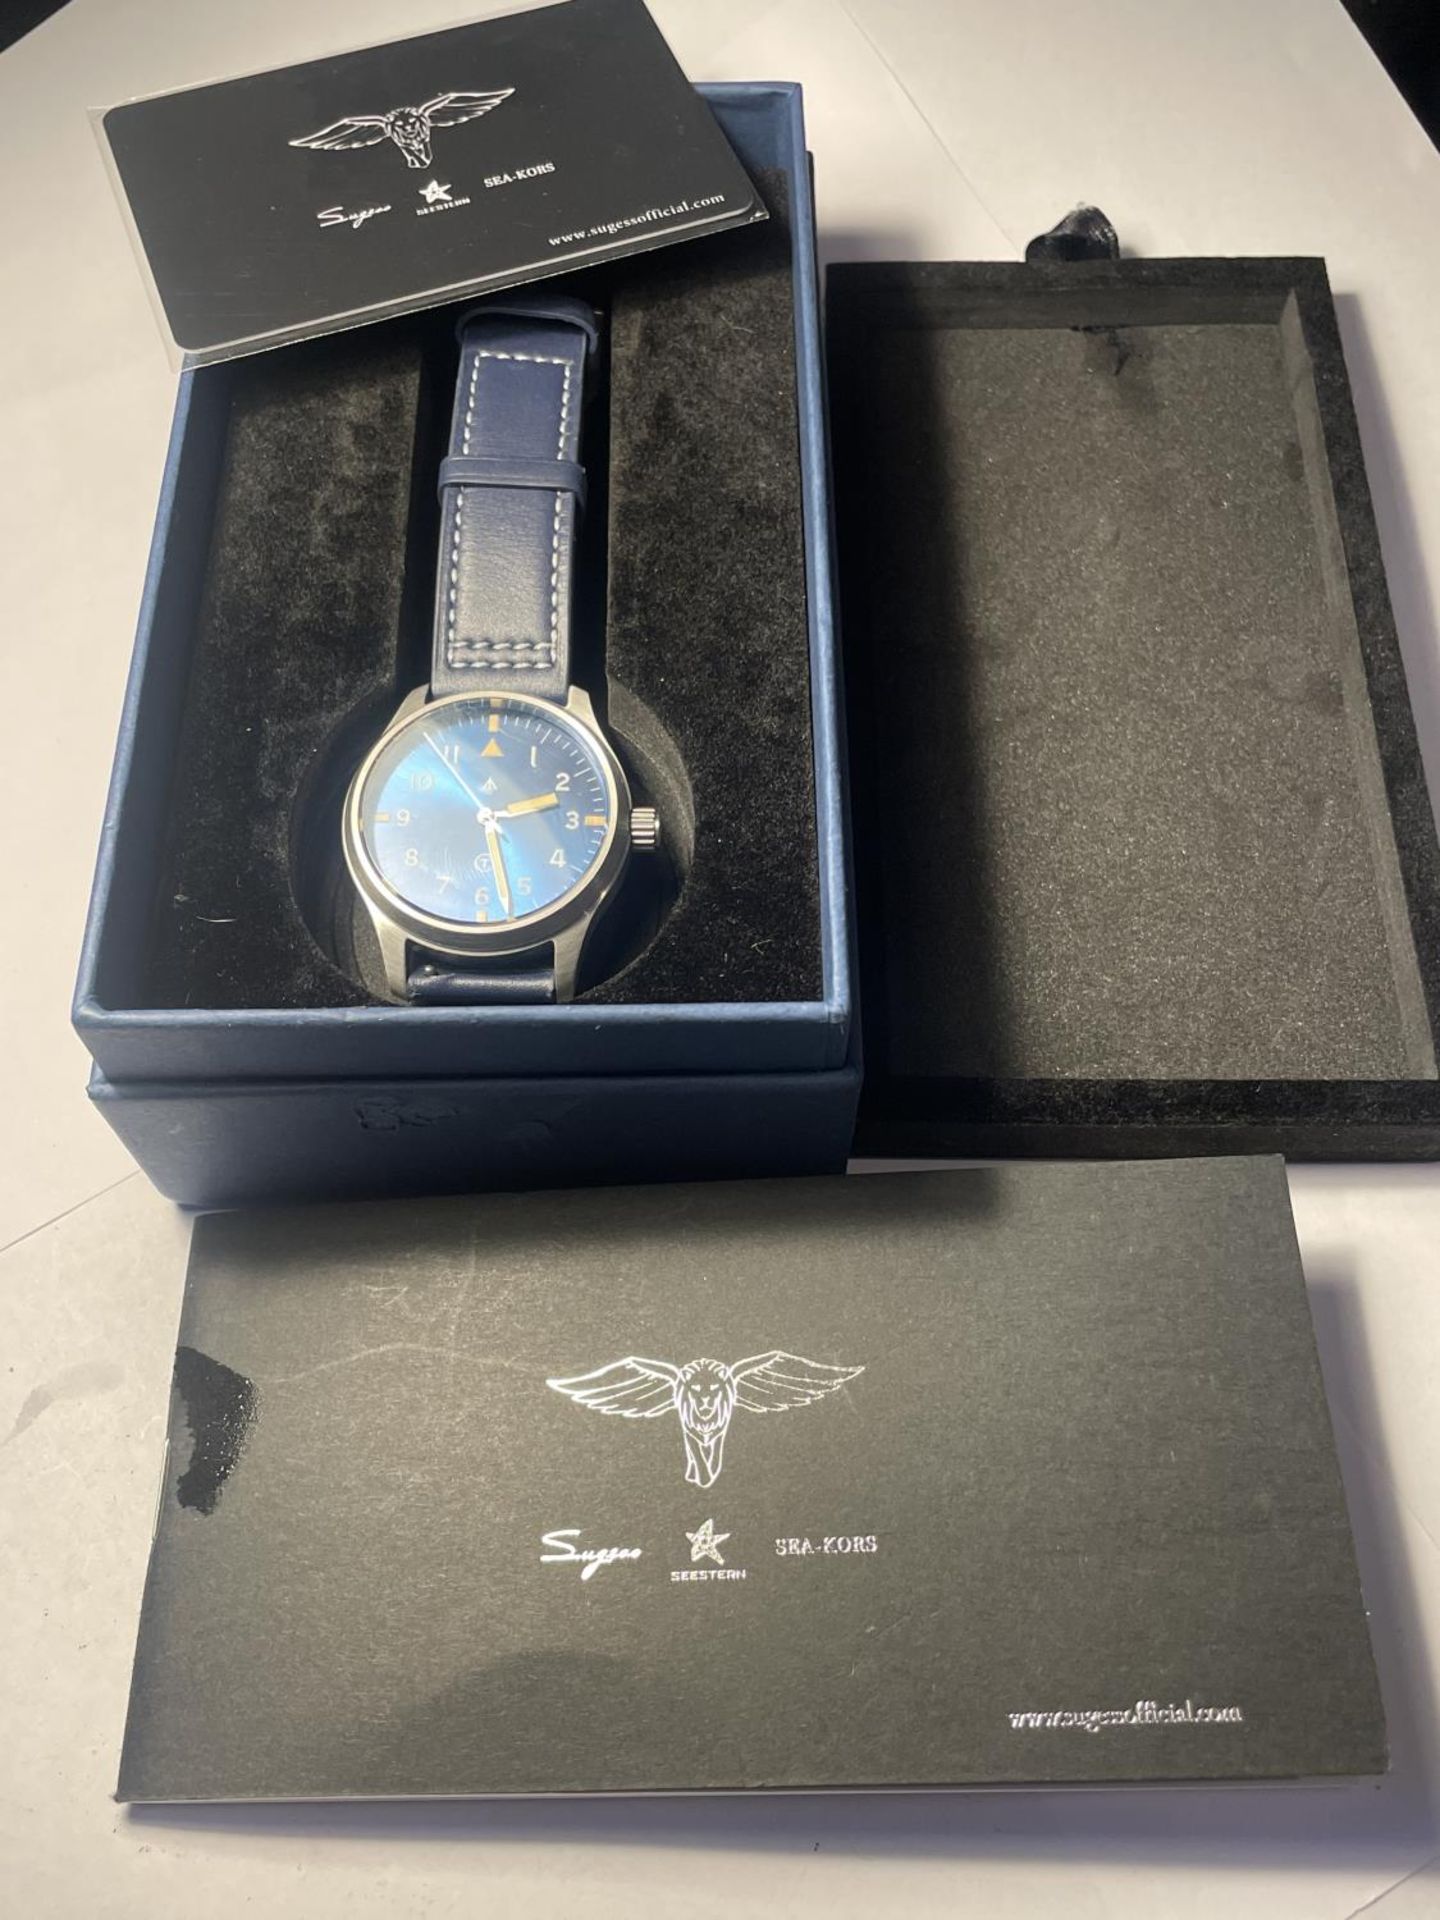 AN AS NEW AND BOXED MILITARY WRIST WATCH SEEN WORKING BUT NO WARRANTY